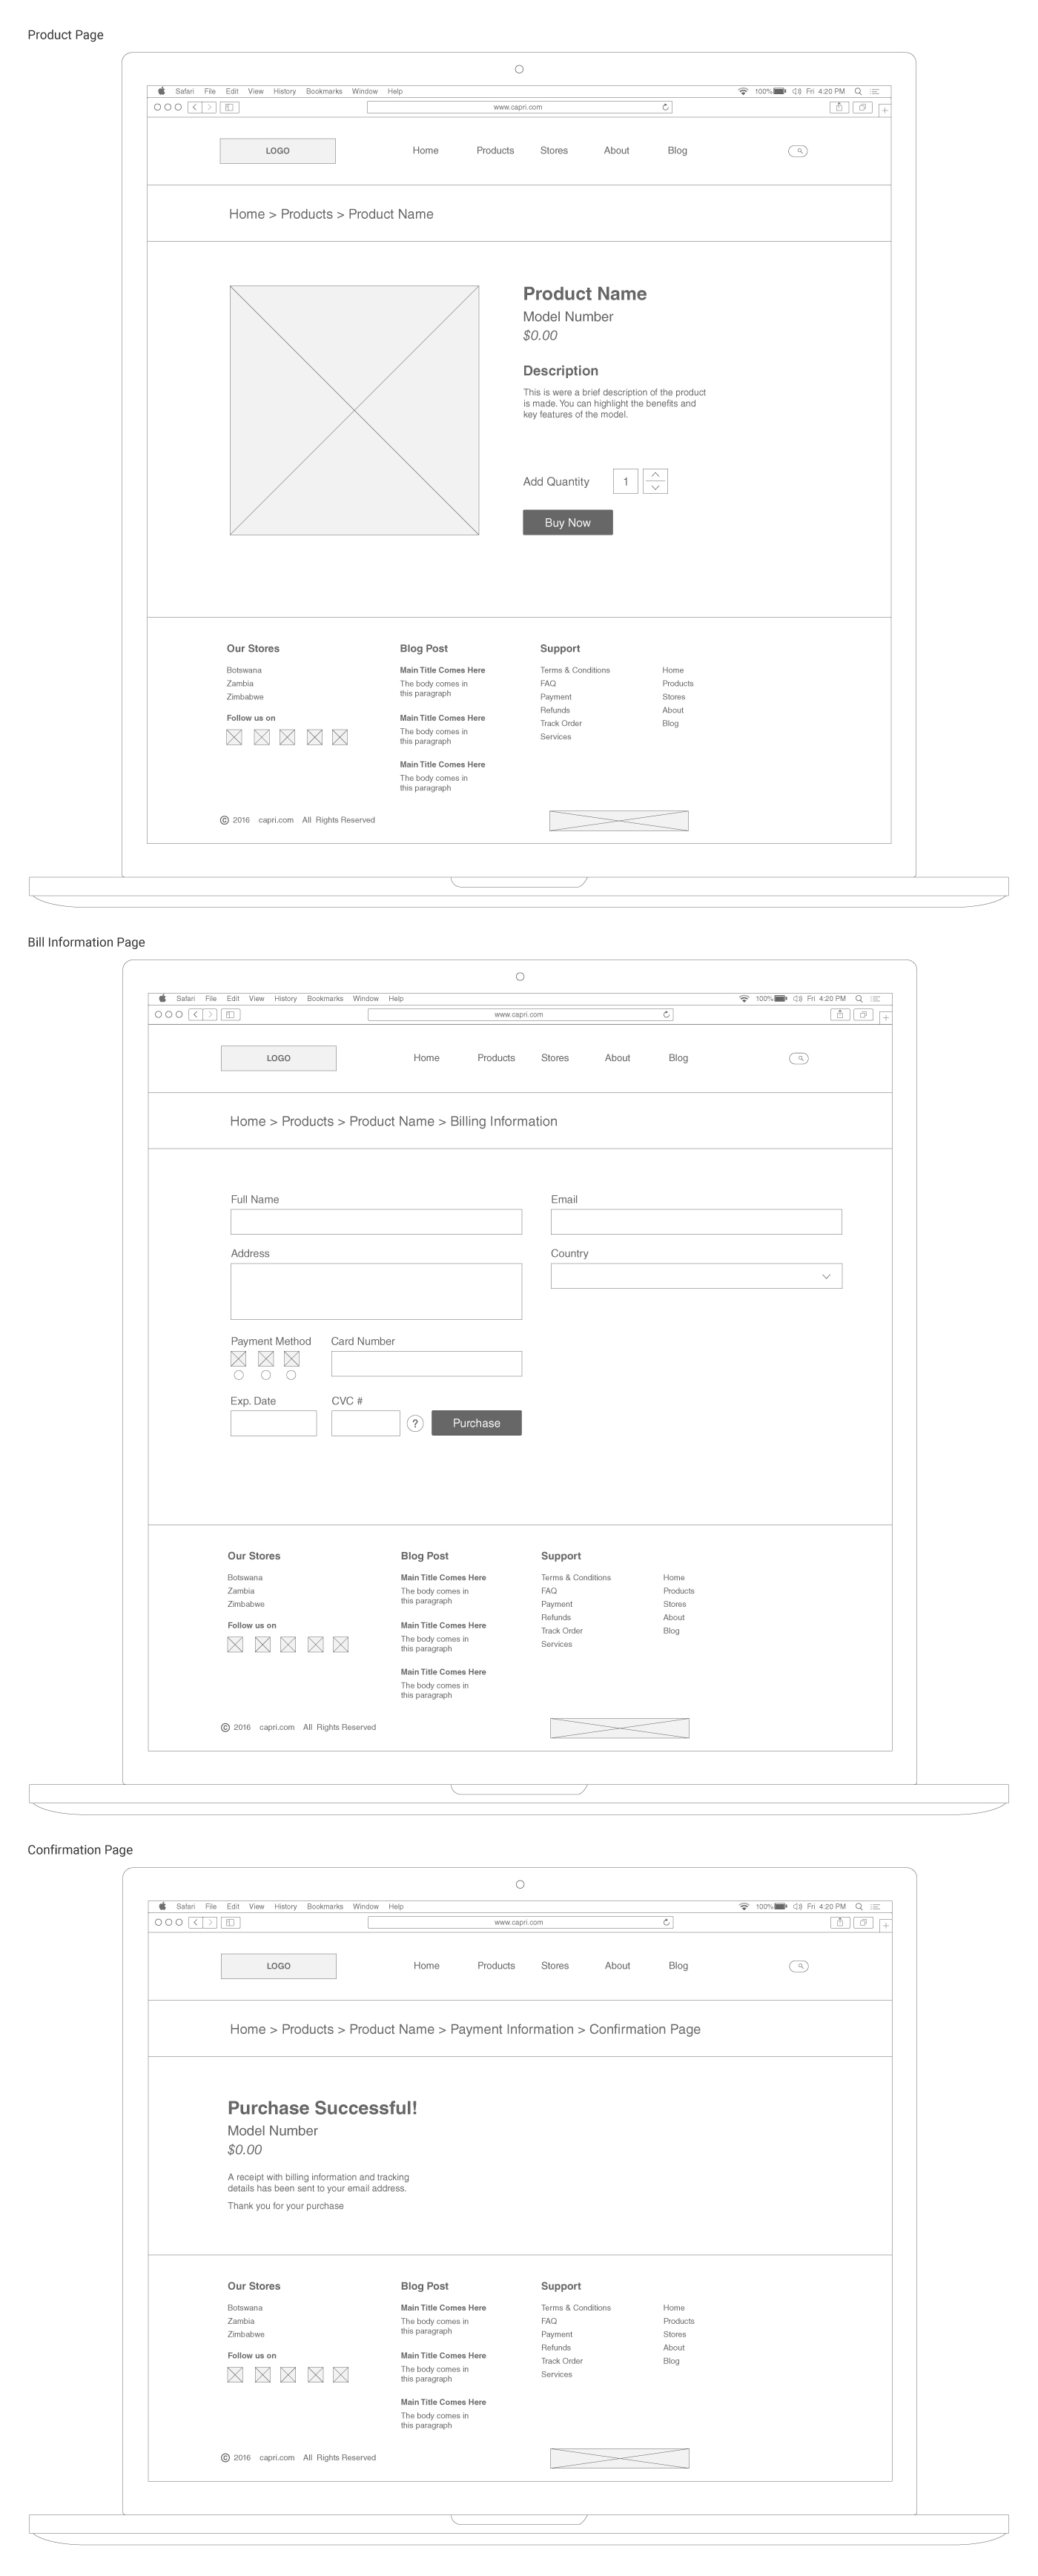 UX design information architecture  wireframe user persona Sitemap User task analysis